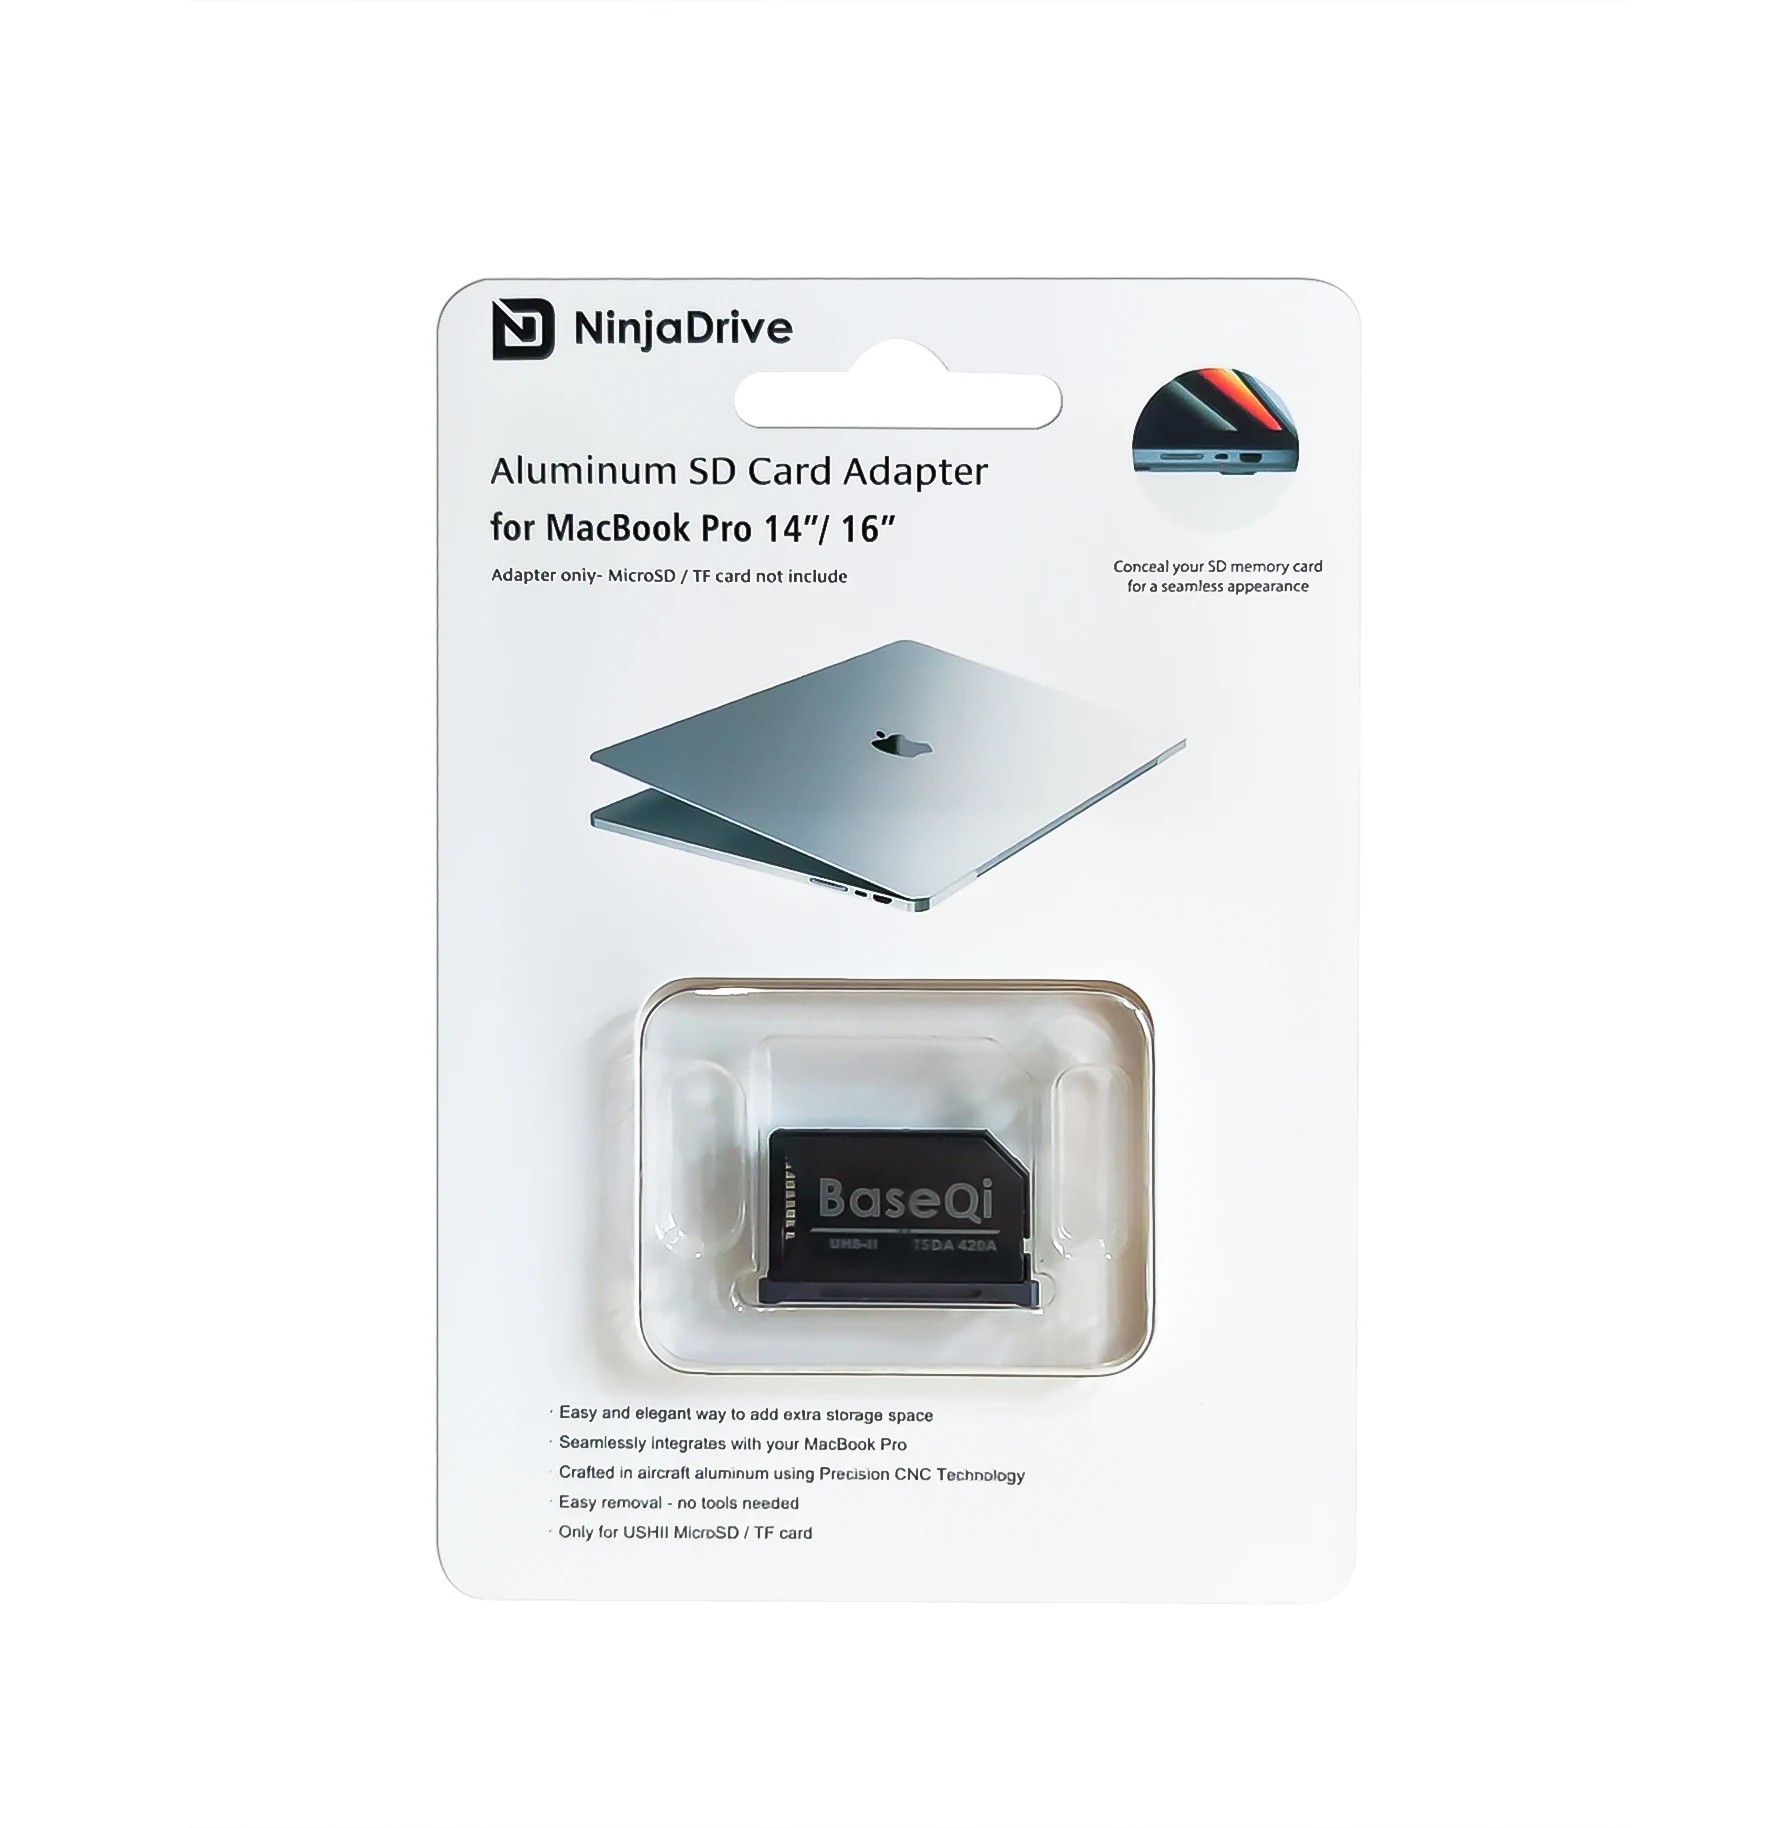 baseqi-macbook-420ab-aluminum-stealth-drive-micro-sd-tf-card-adapter-sd-card-reader-for-macbook-pro-retina-14-16-inch